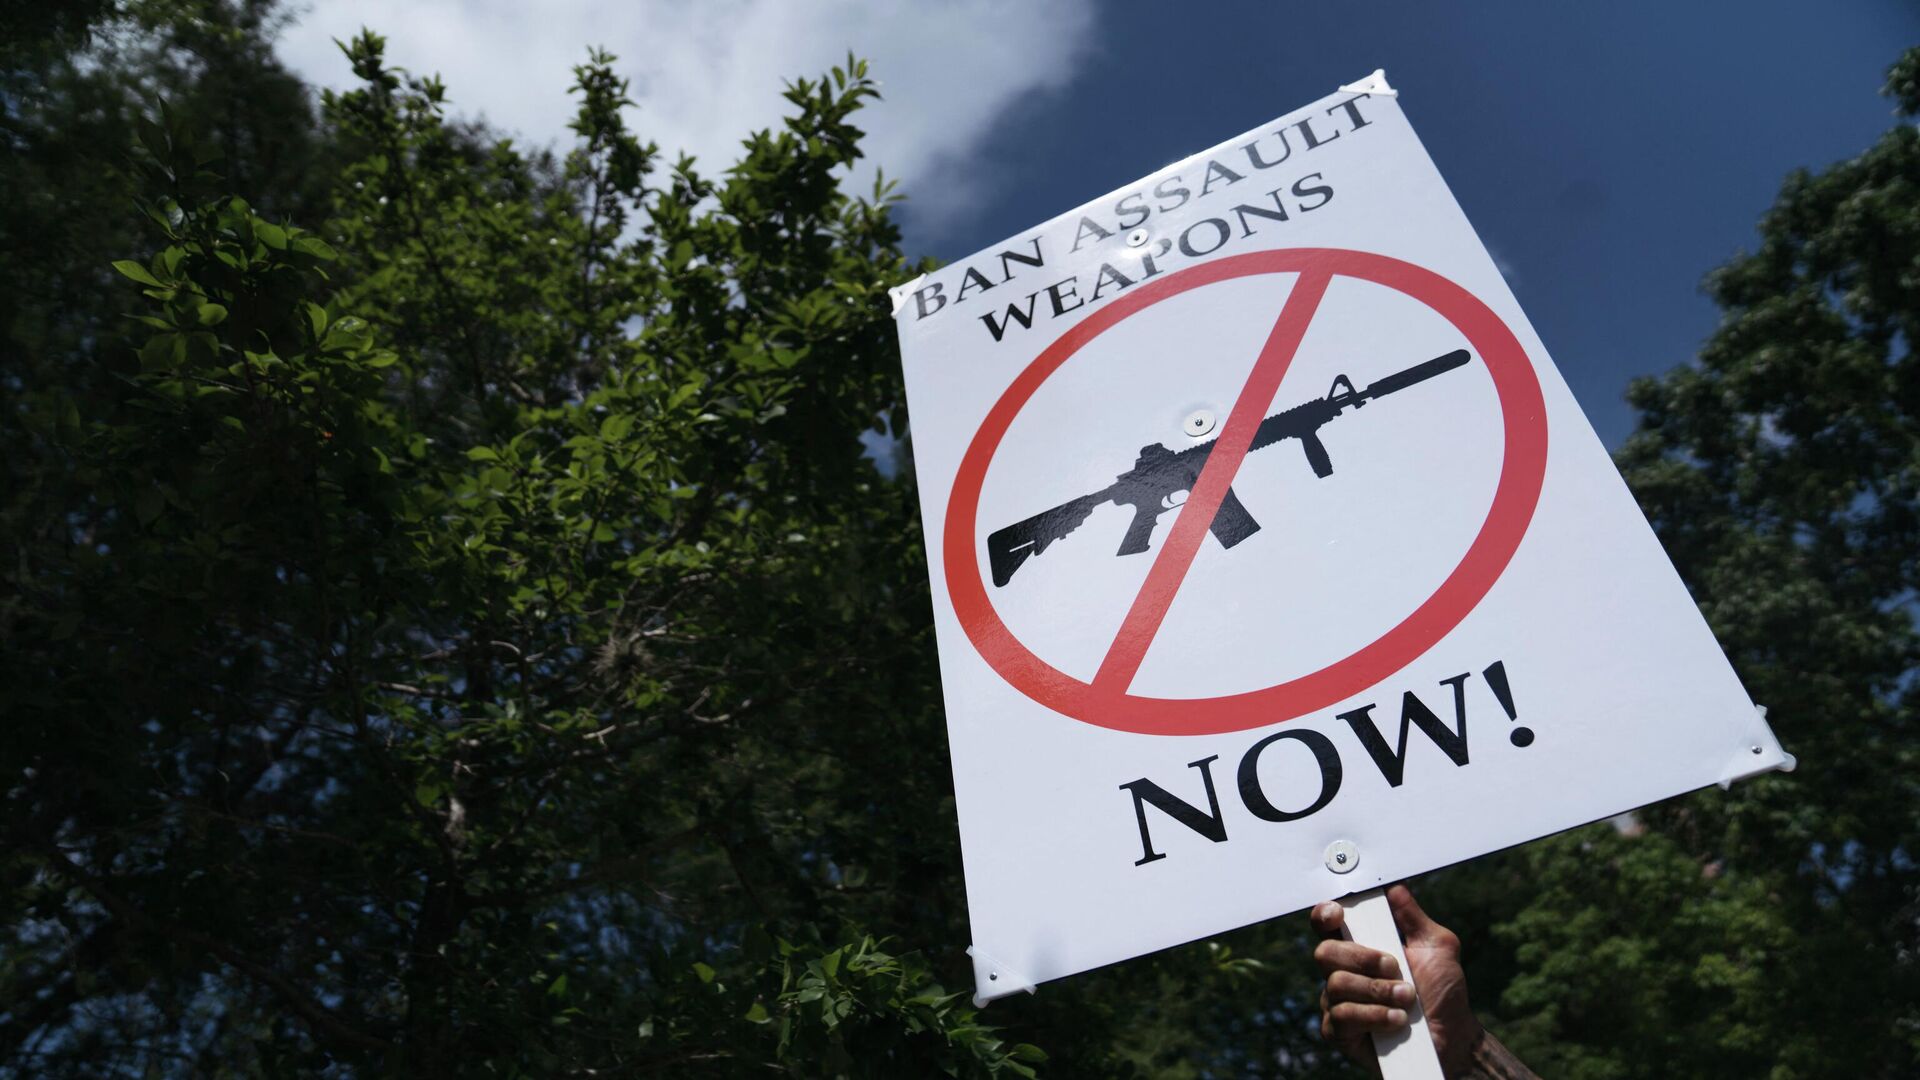 HOUSTON, TX - MAY 27: A gun control advocate holds a sign during a protest across from the National Rifle Association Annual Meeting at the George R. Brown Convention Center, on May 27, 2022 in Houston, Texas.  - Sputnik International, 1920, 03.06.2022